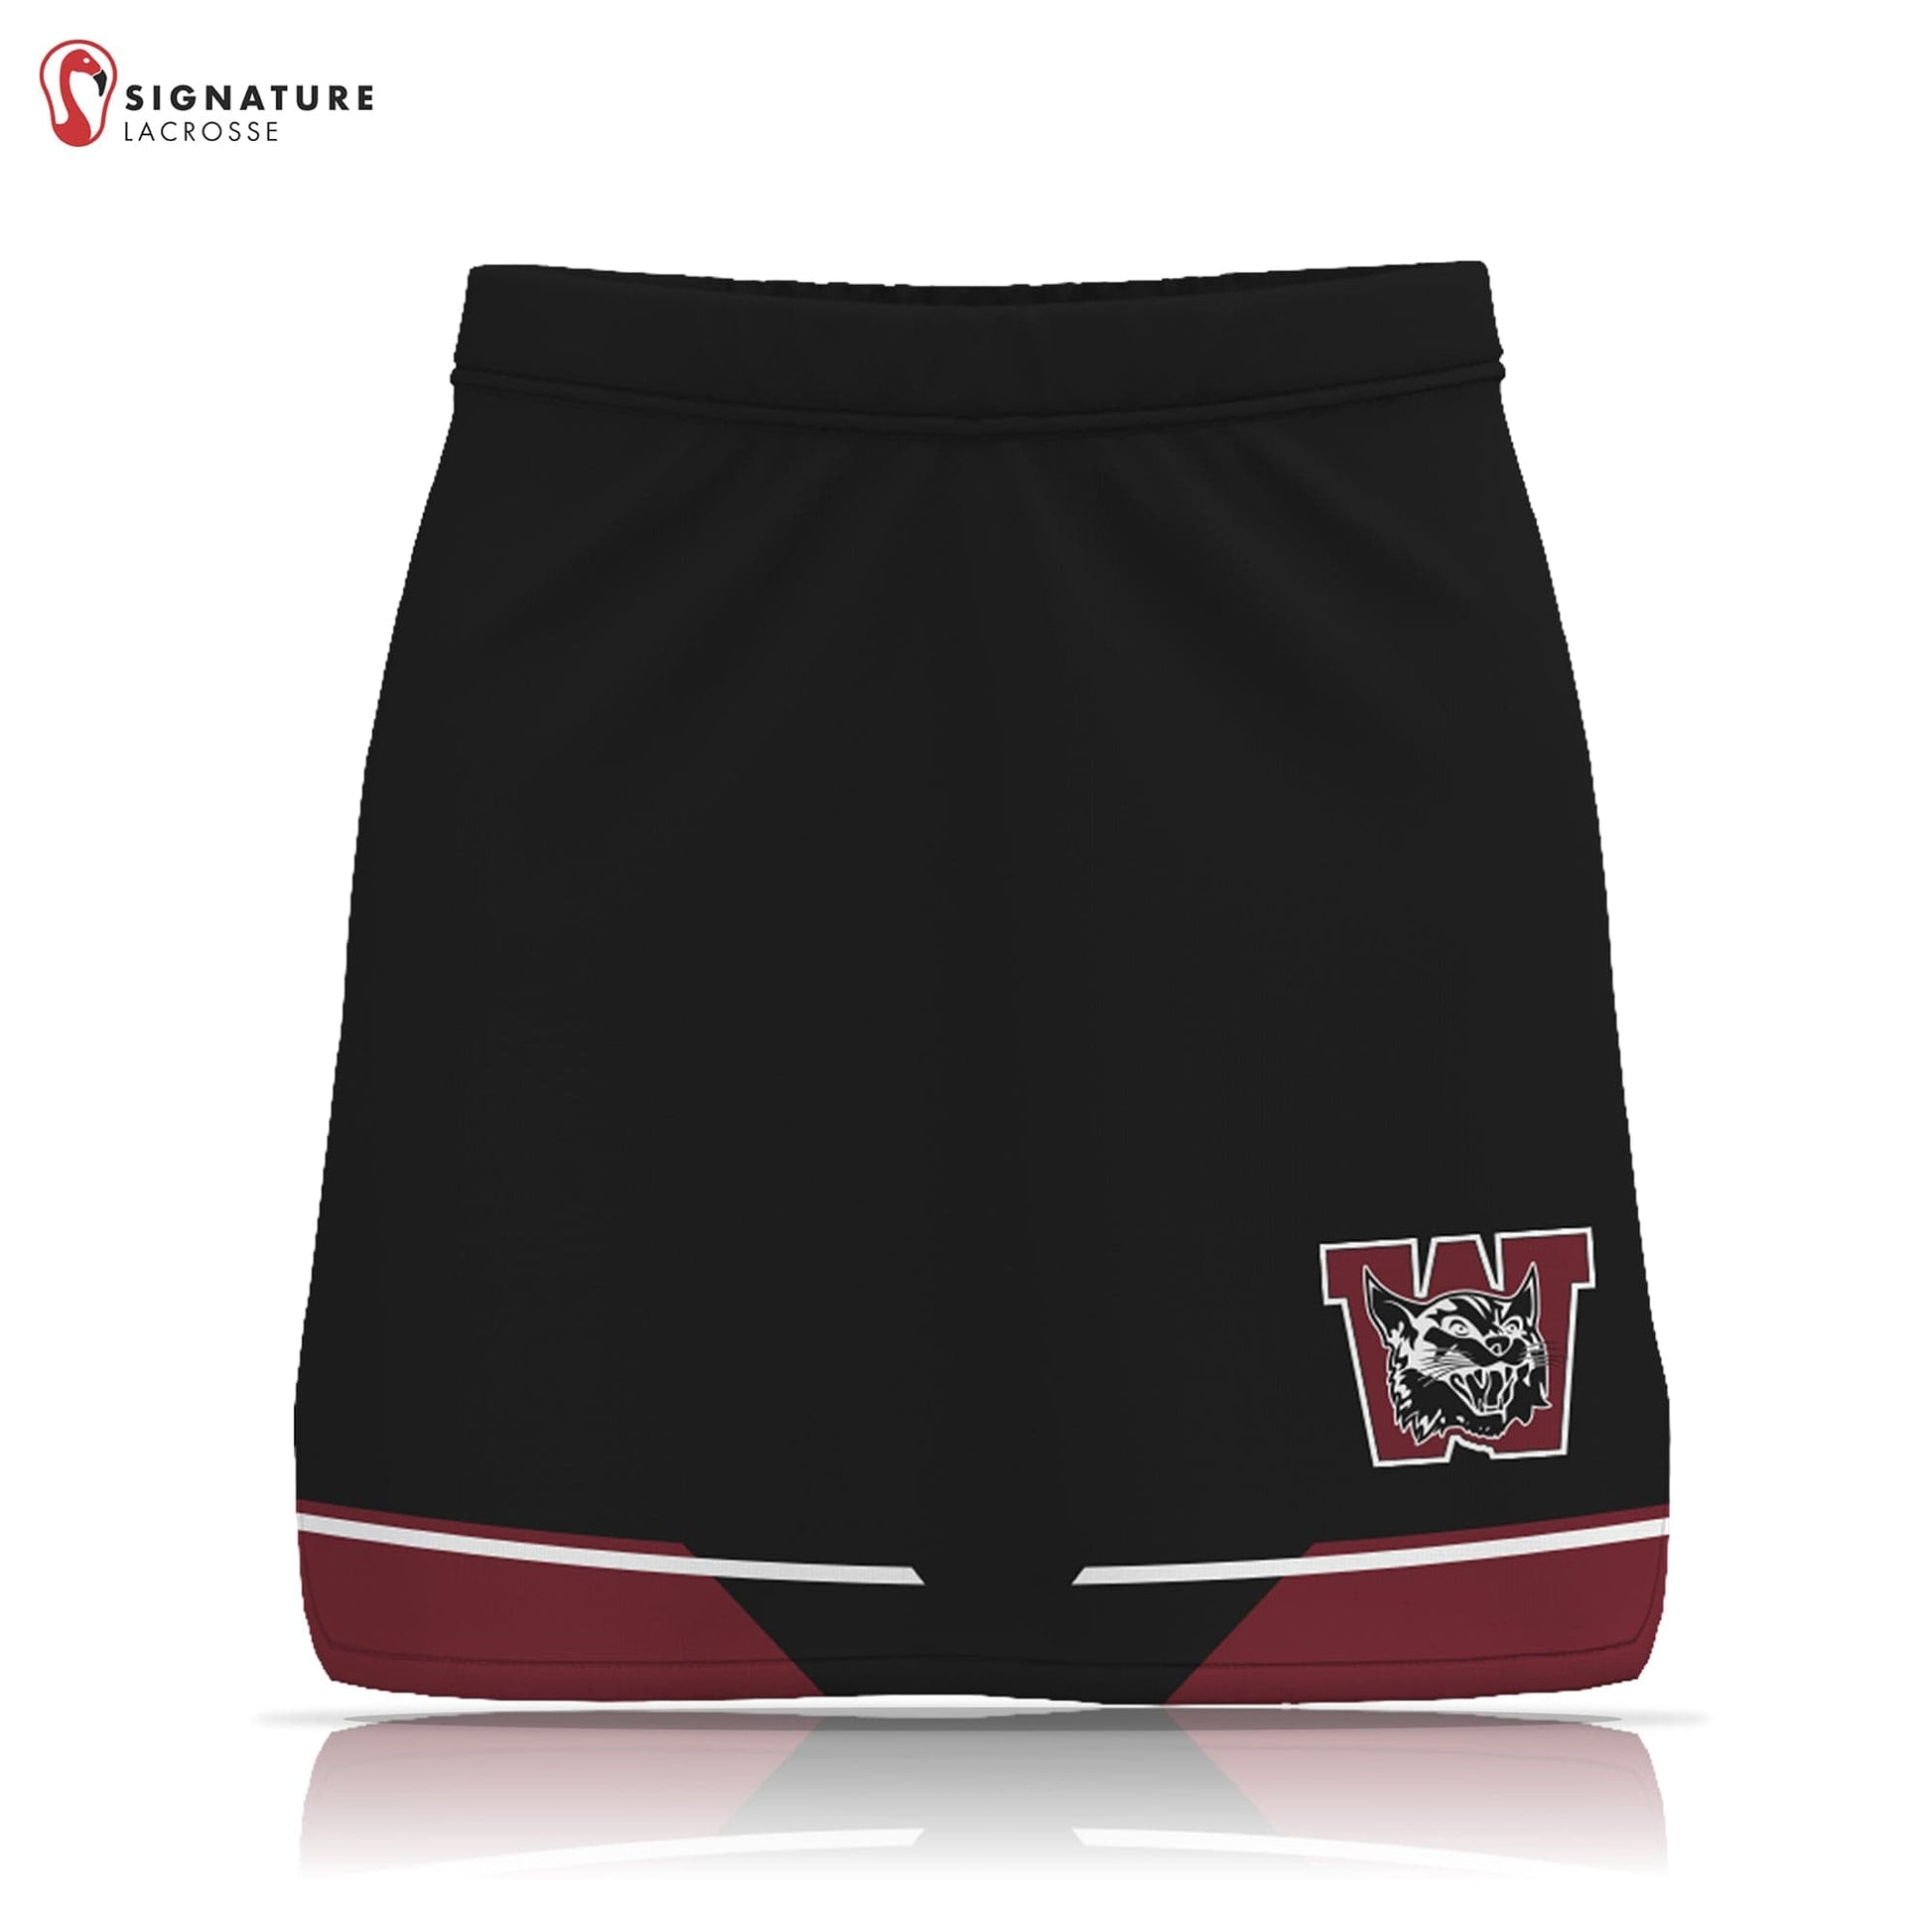 Weston Youth Lacrosse Women's Player Game Skirt: Grade 1-2 Signature Lacrosse